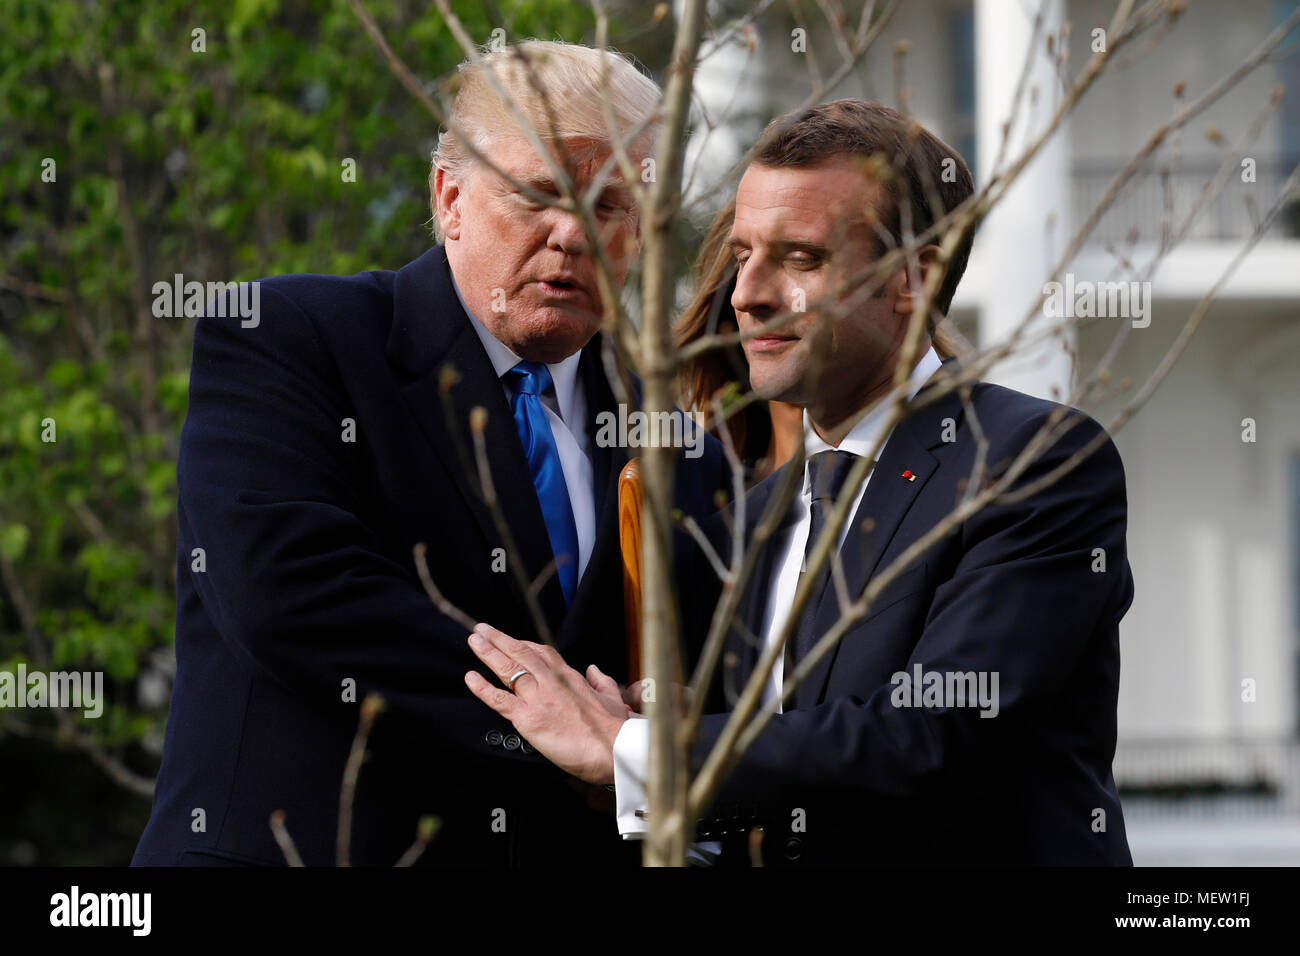 U.S. President Donald Trump and France's president Emmanuel Macron greet each other after planting a tree, a gift from the President and Mrs. Macron, on the South Lawn of the White House in Washington, DC, U.S., on Monday, April 23, 2018. As Macron arrives for the first state visit of Trump's presidency, the U.S. leader is threatening to upend the global trading system with tariffs on China, maybe Europe too. Credit: Yuri Gripas/Pool via CNP /MediaPunch Stock Photo